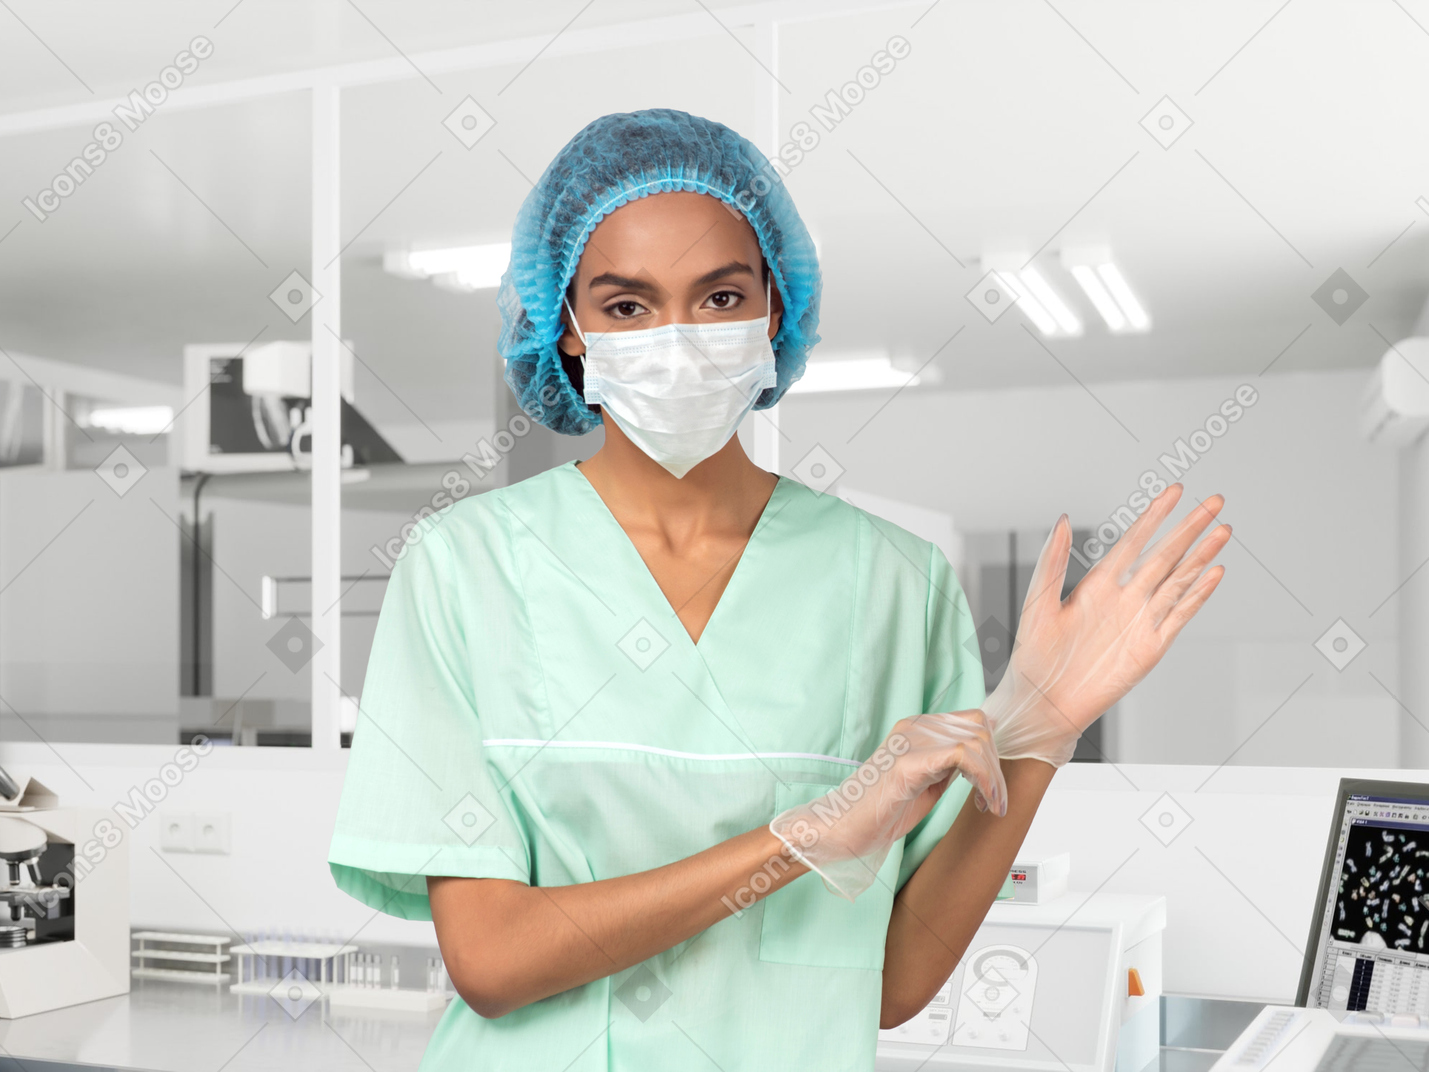 Portrait of a female doctor in hospital